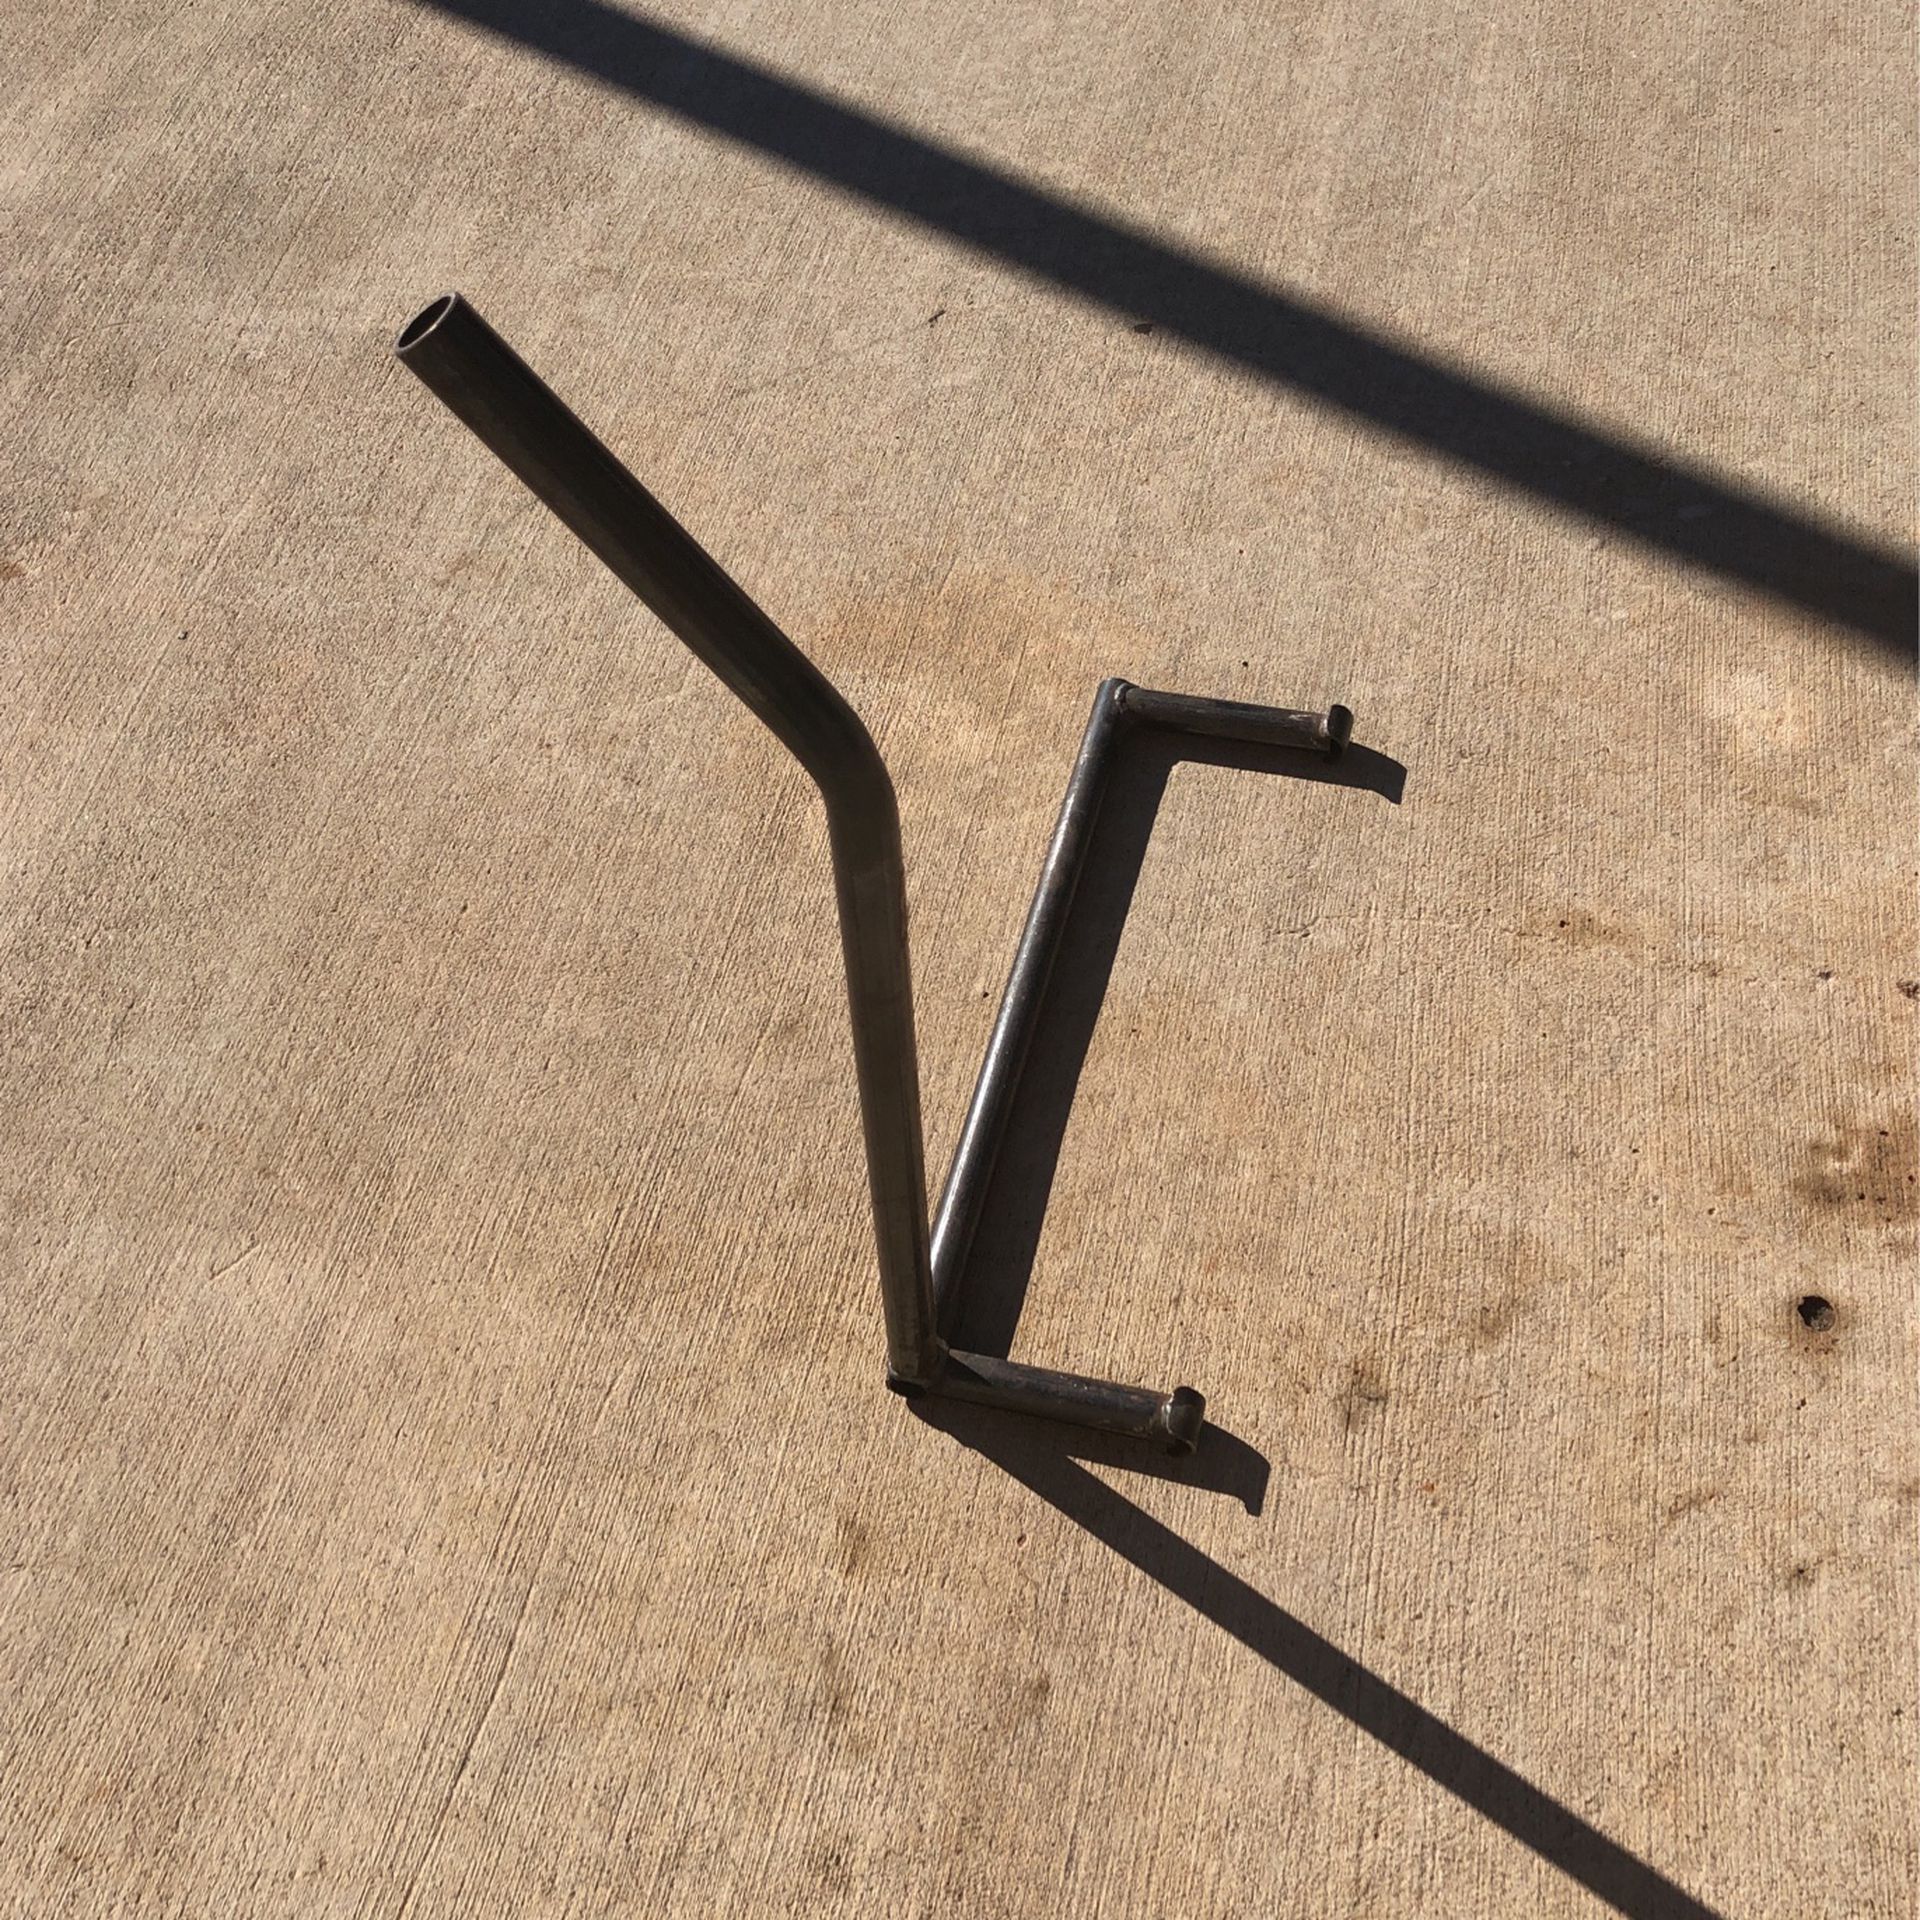 Motorcycle Stand $20